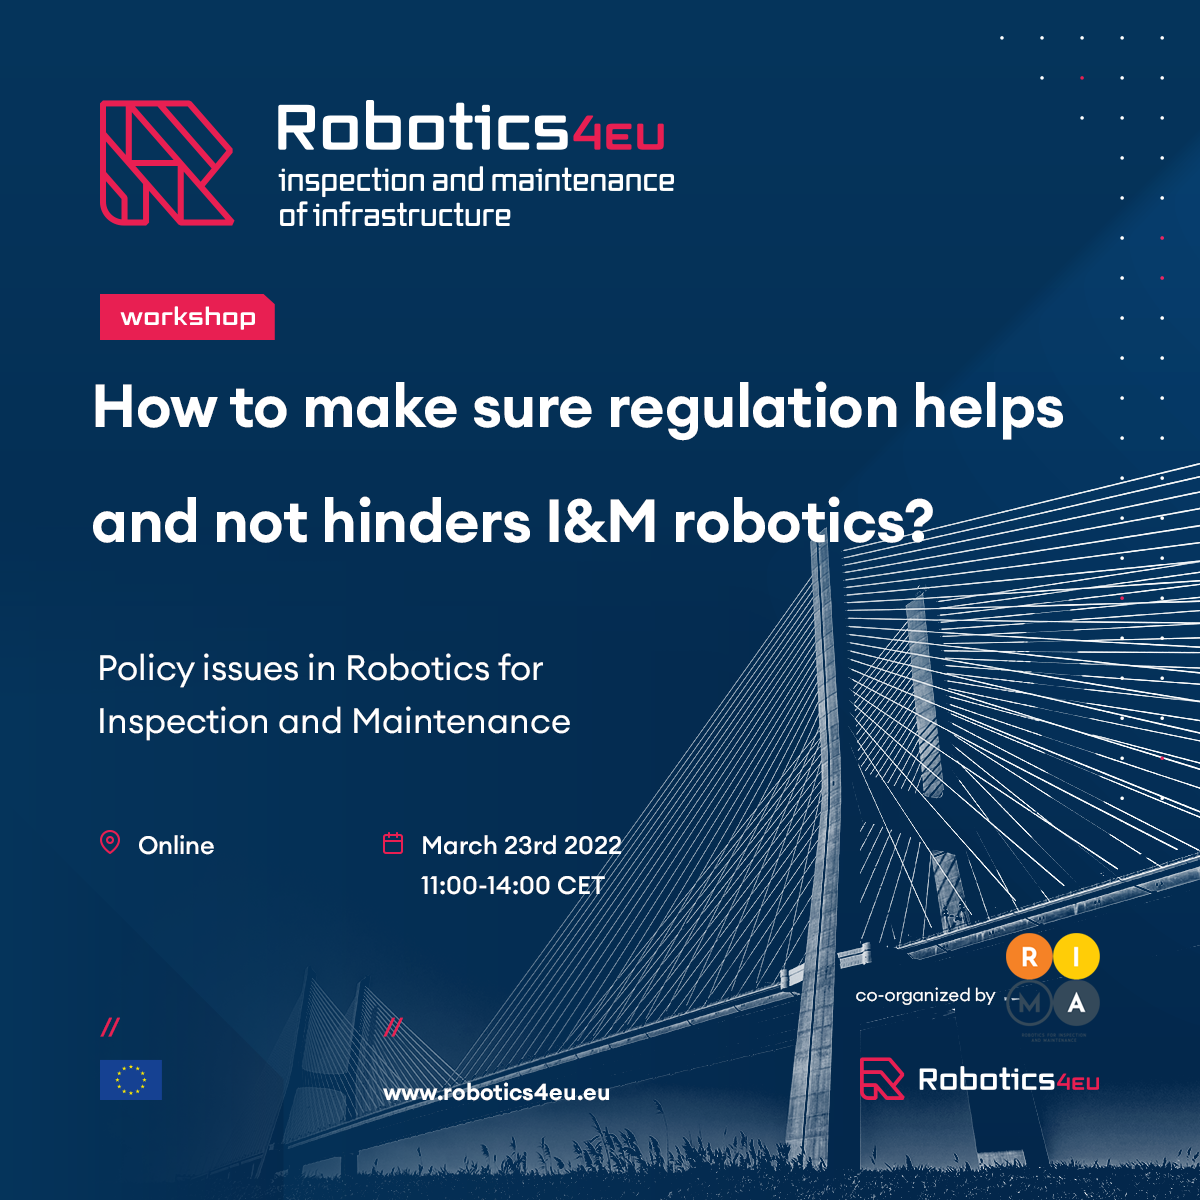 How to make sure regulation helps and not hinders I&M robotics? Policy issues in Robotics for Inspection and Maintenance